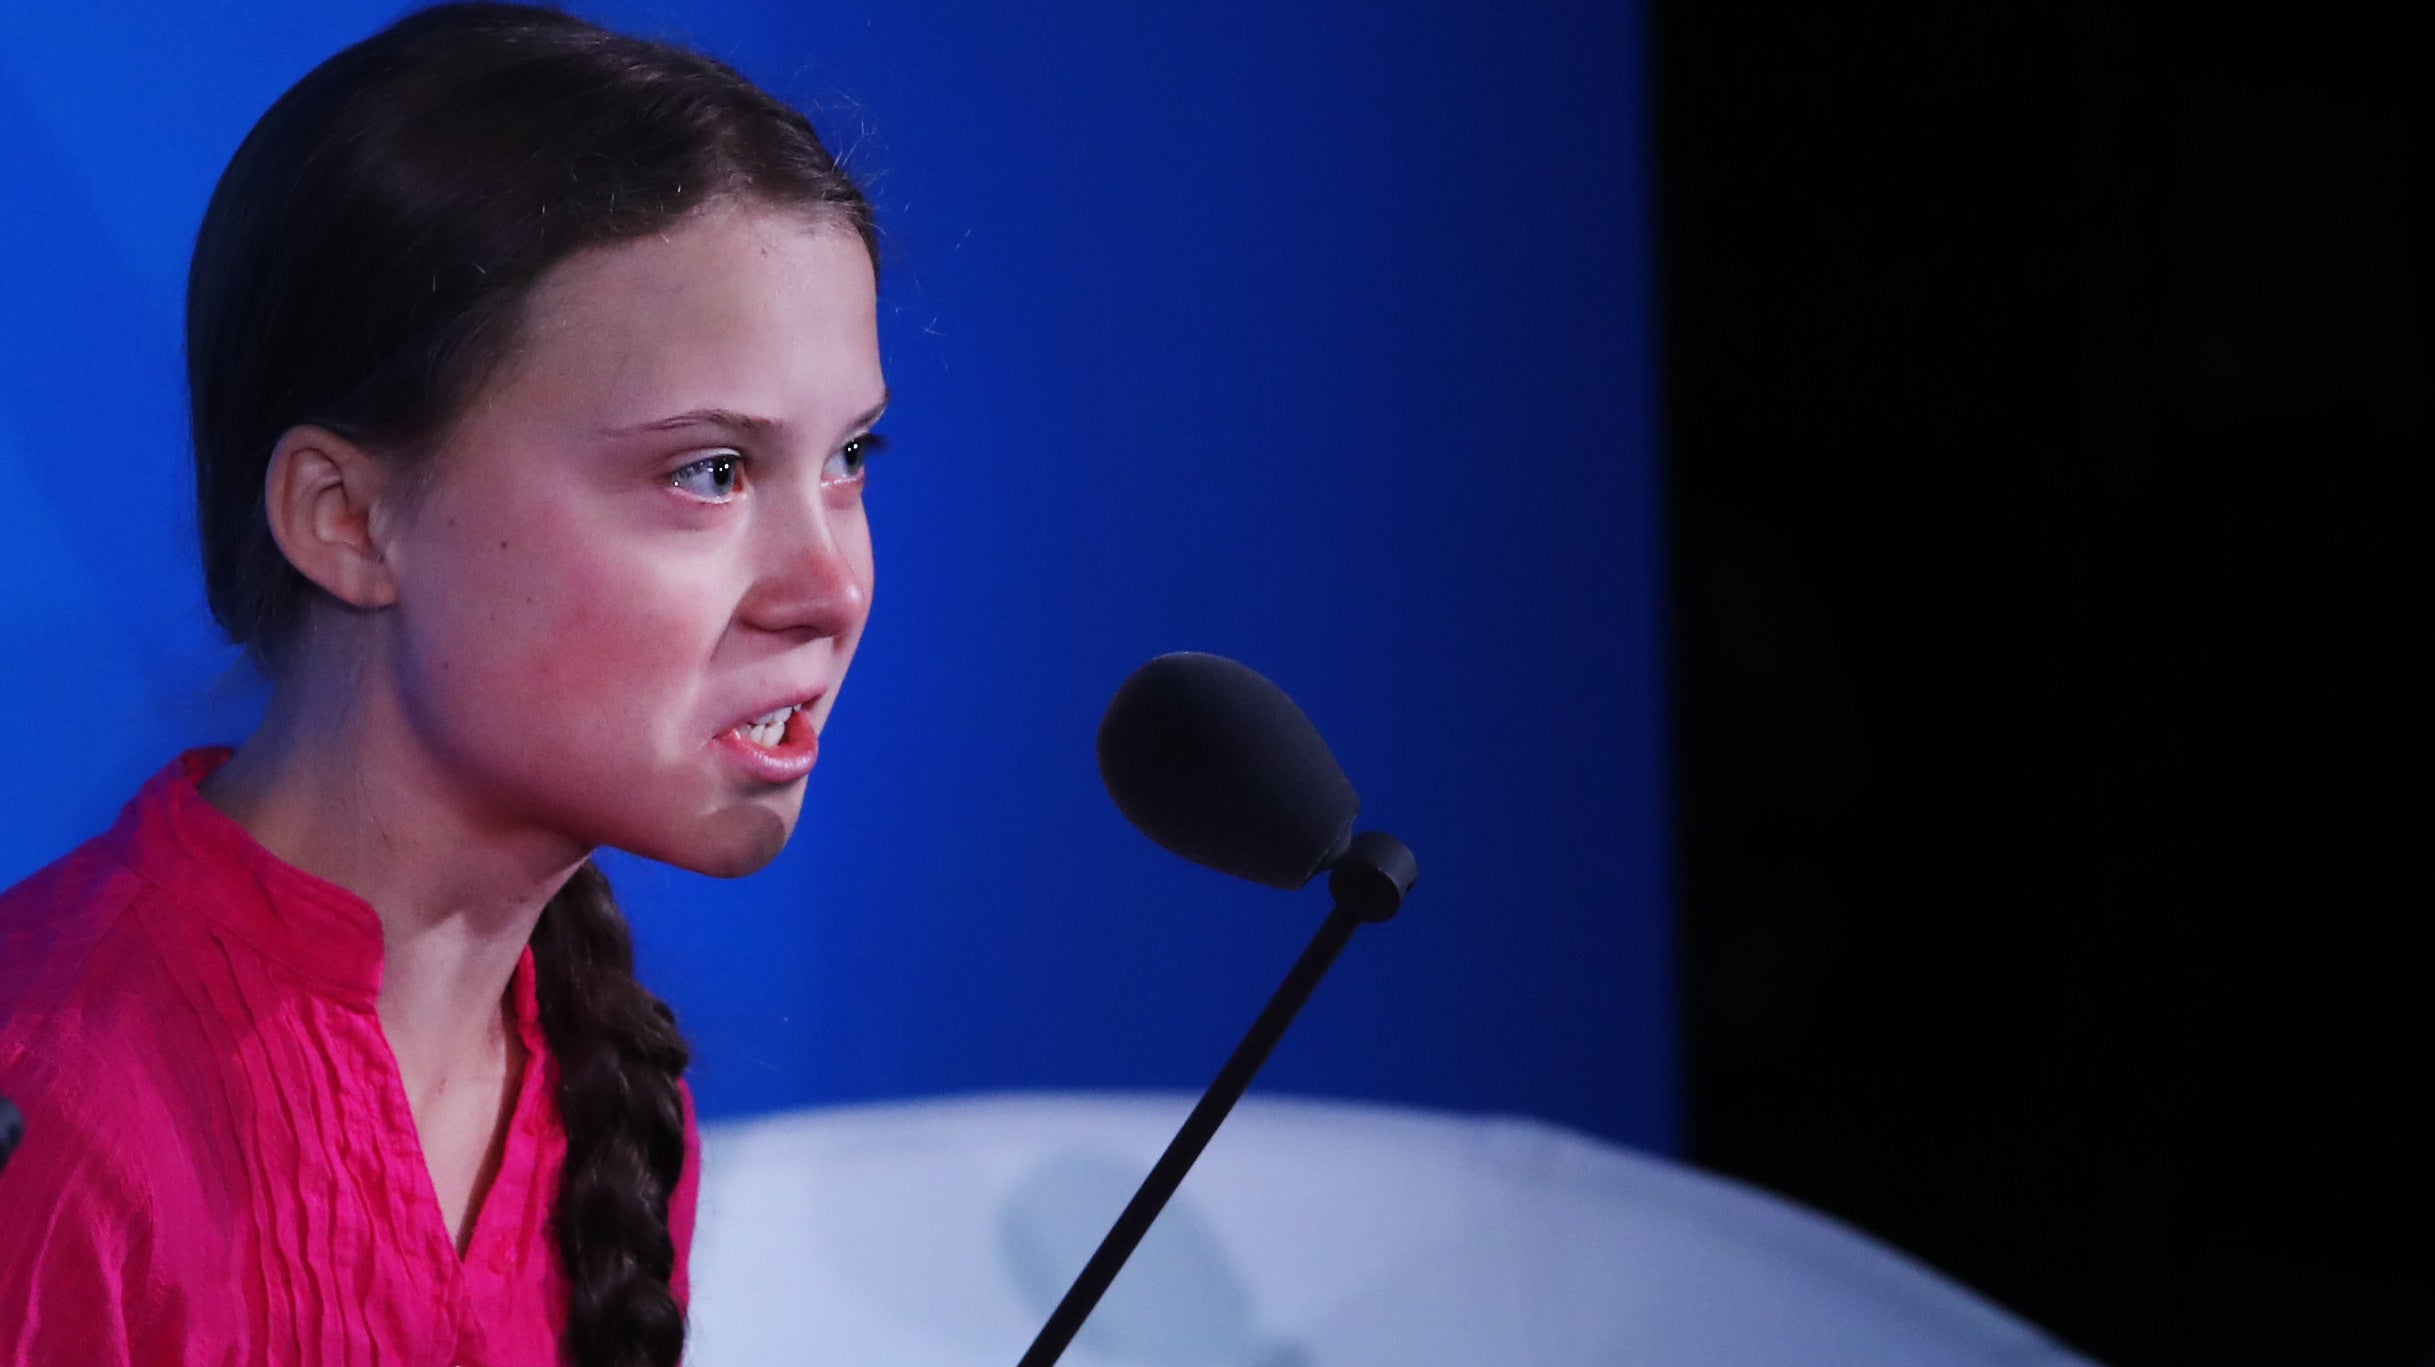 How To Watch Greta Thunberg’s Testimony At The United Nations’ Climate Action Summit